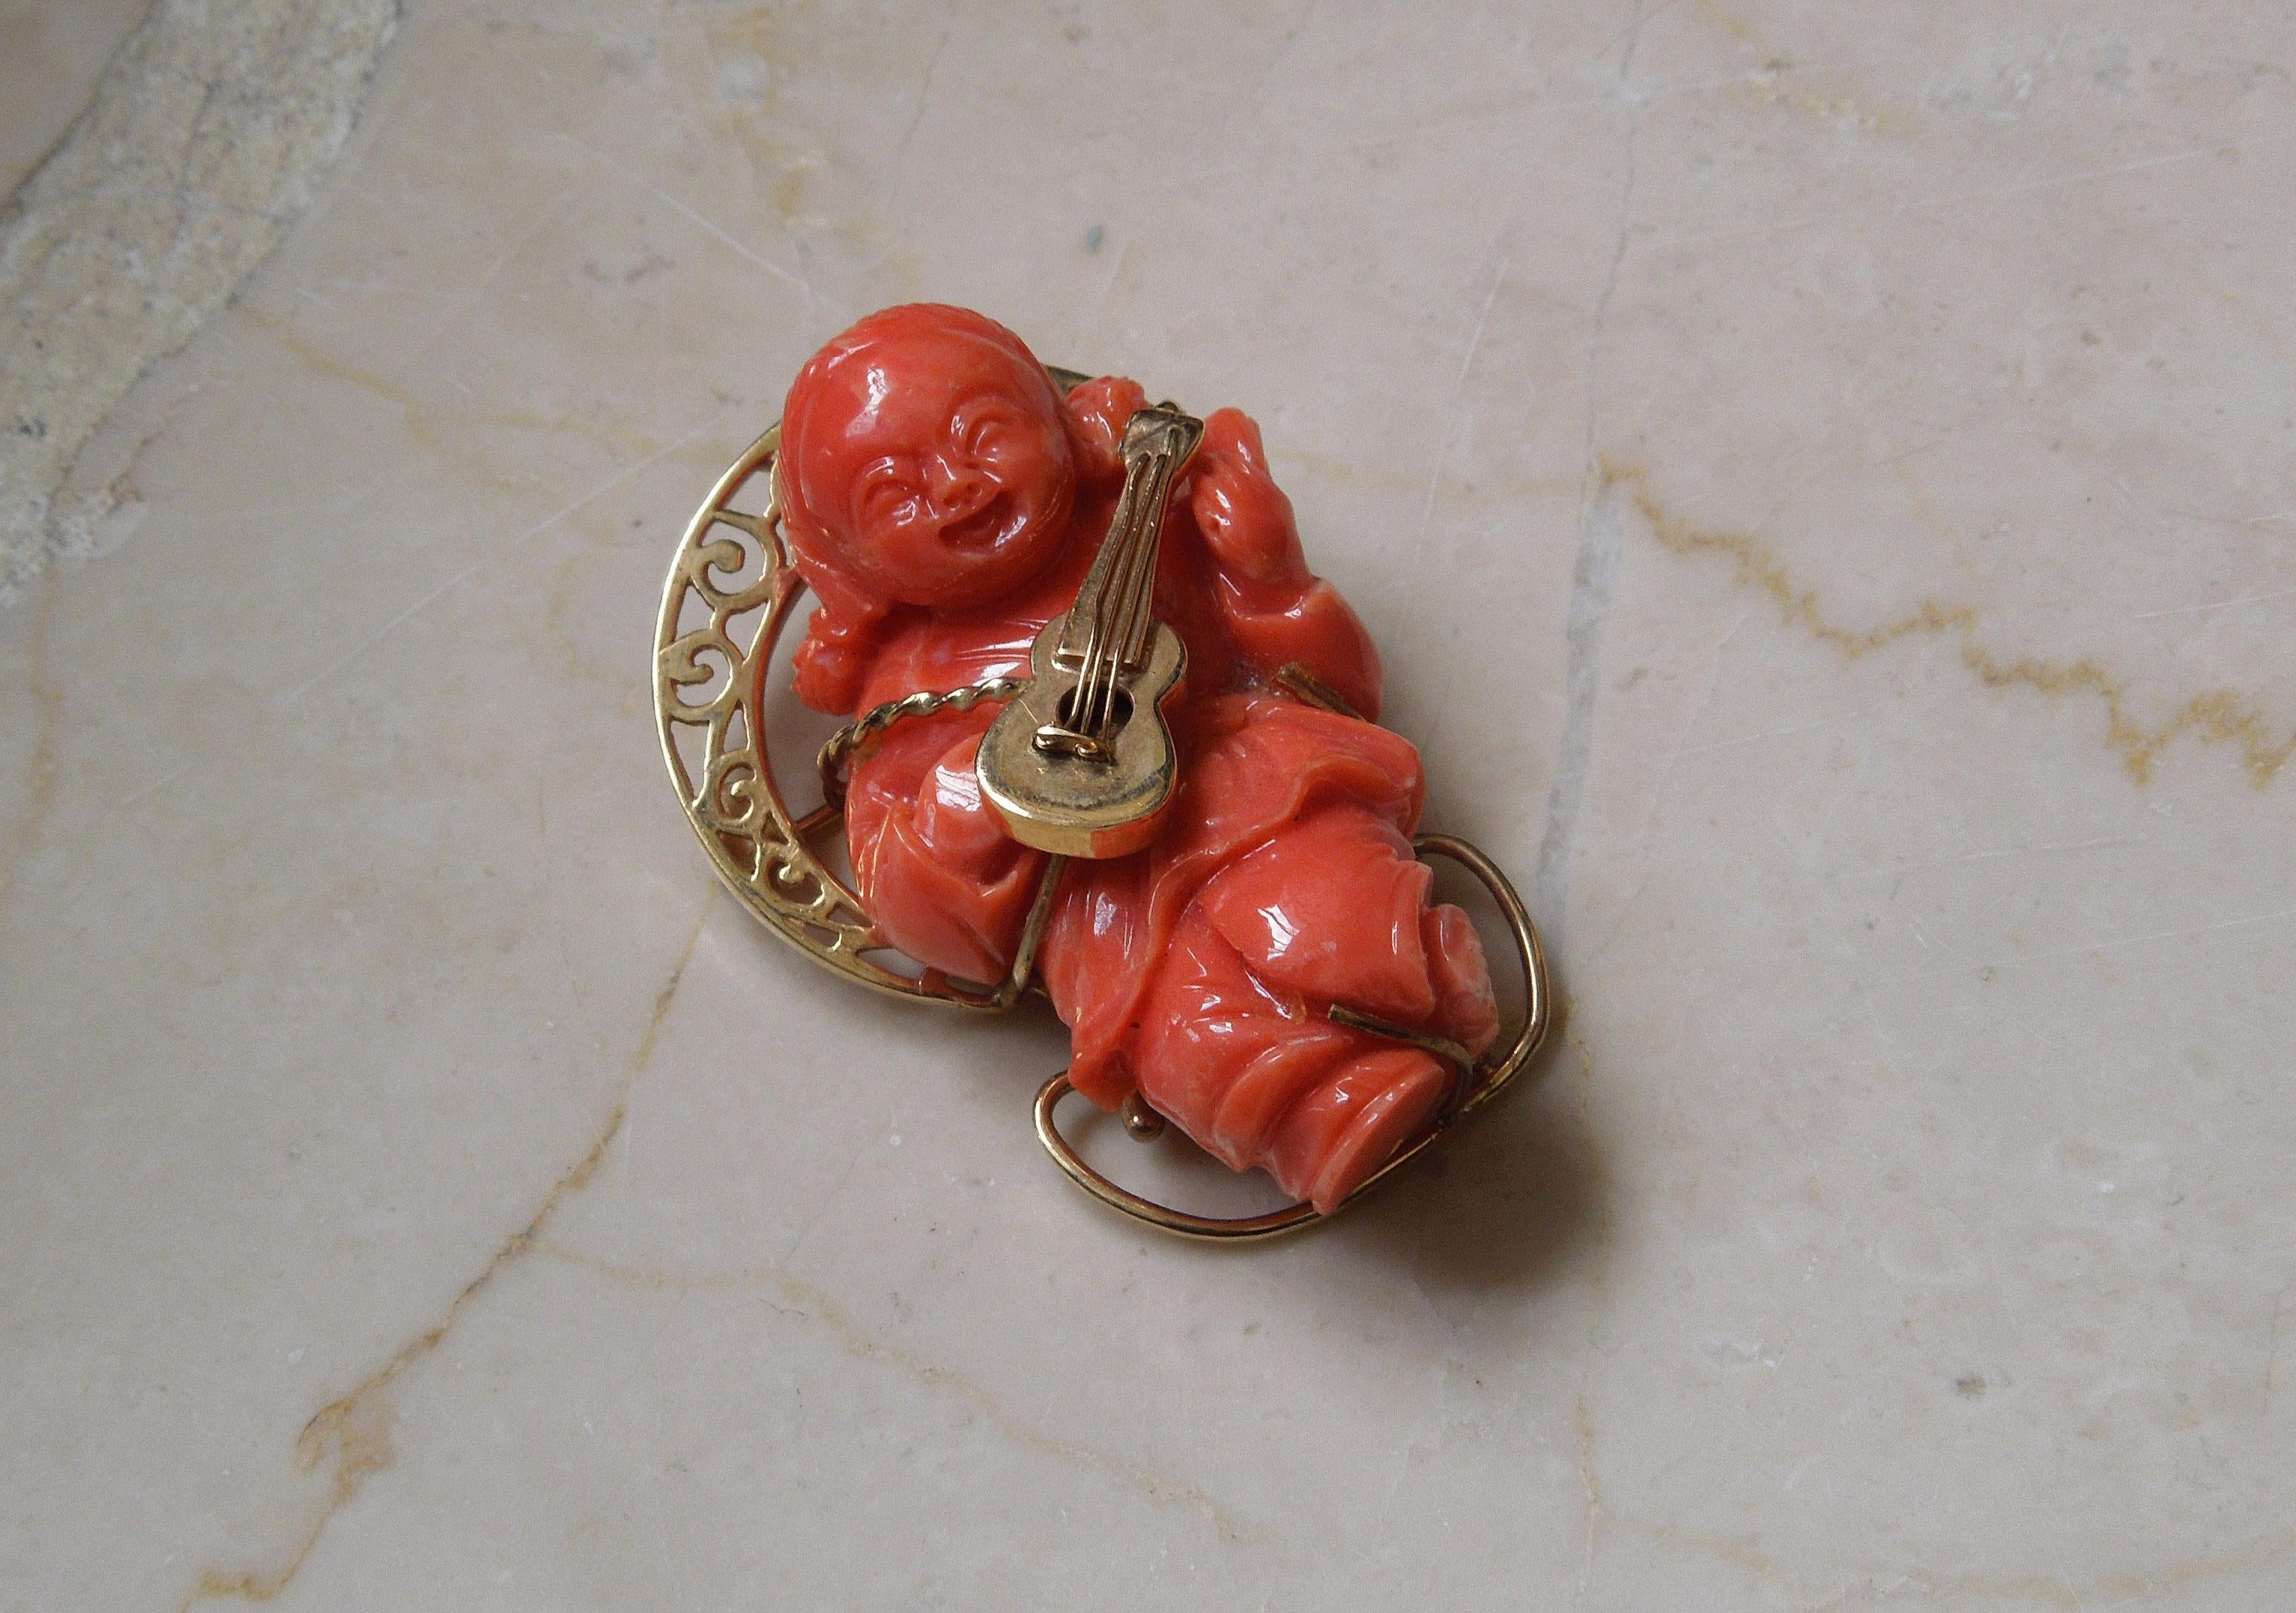 Featuring 1 Single Hand Carved piece of Natural Coral, secured in 3 Gold Prongs as well as reinforced by musical instrument - Hand-Fabricated completely of 14 Karat Gold. With a vivid, even color, Coral / Red Coral of this fine quality is becoming